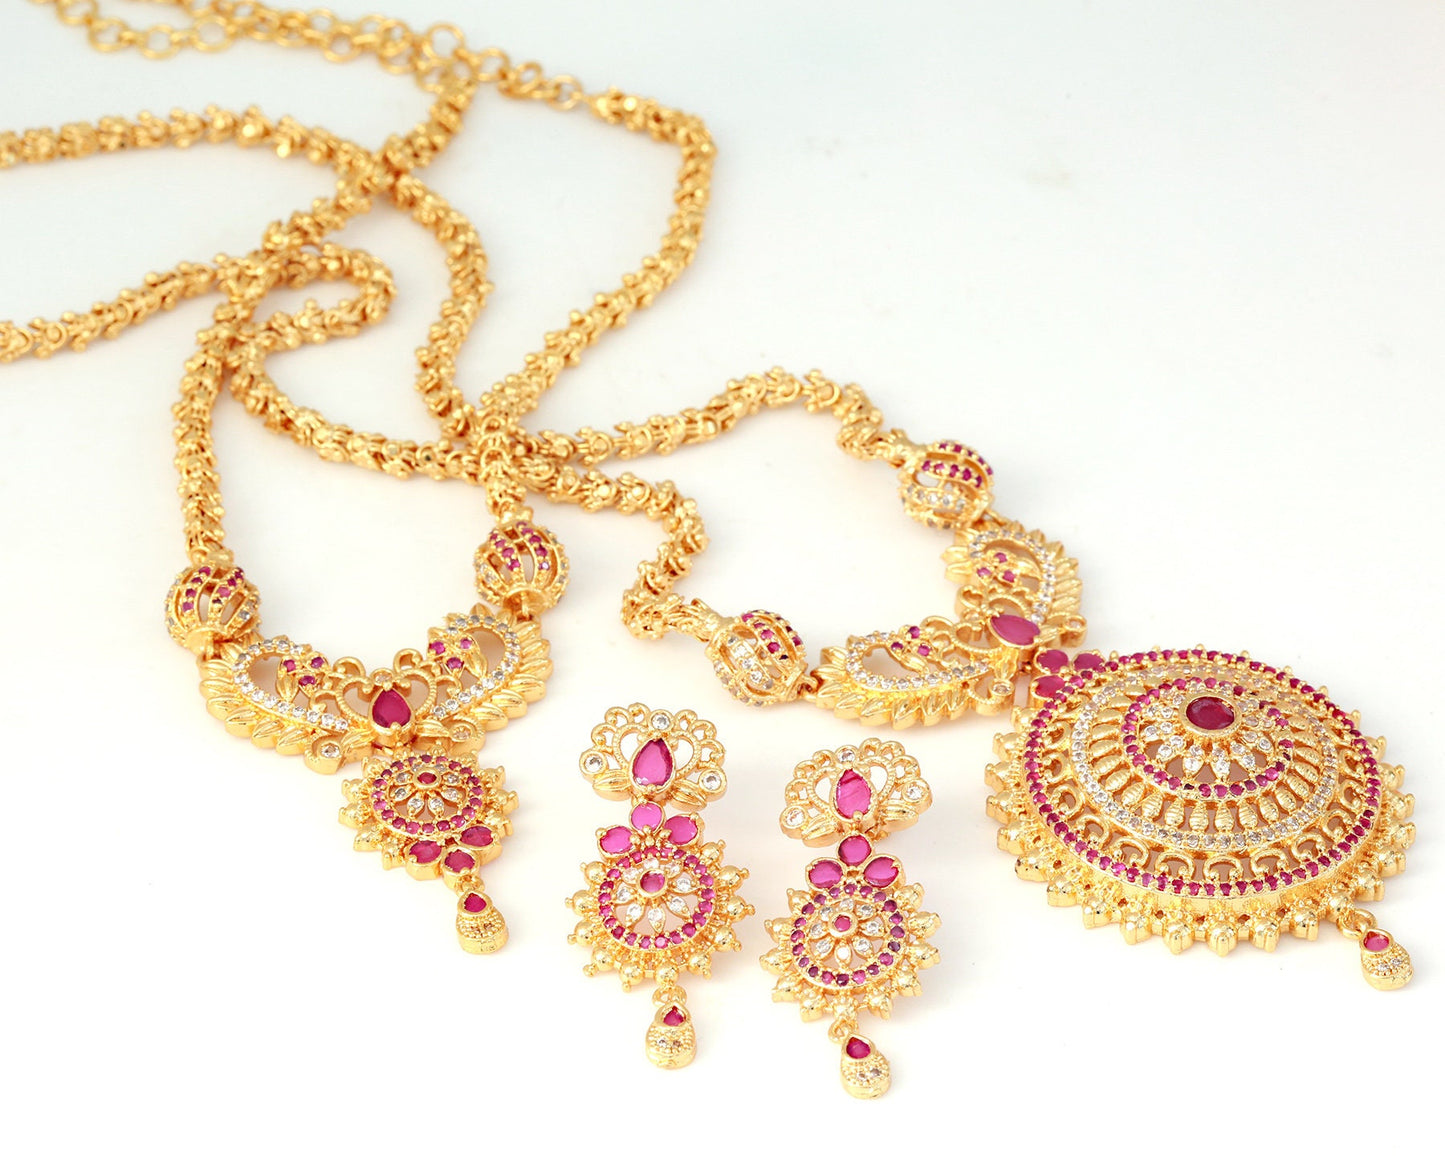 Gold plated Long and Short Necklace Indian Jewelry | CZ AD necklace set with Jhumka earrings | Temple Jewelry for wedding saree and lehenga